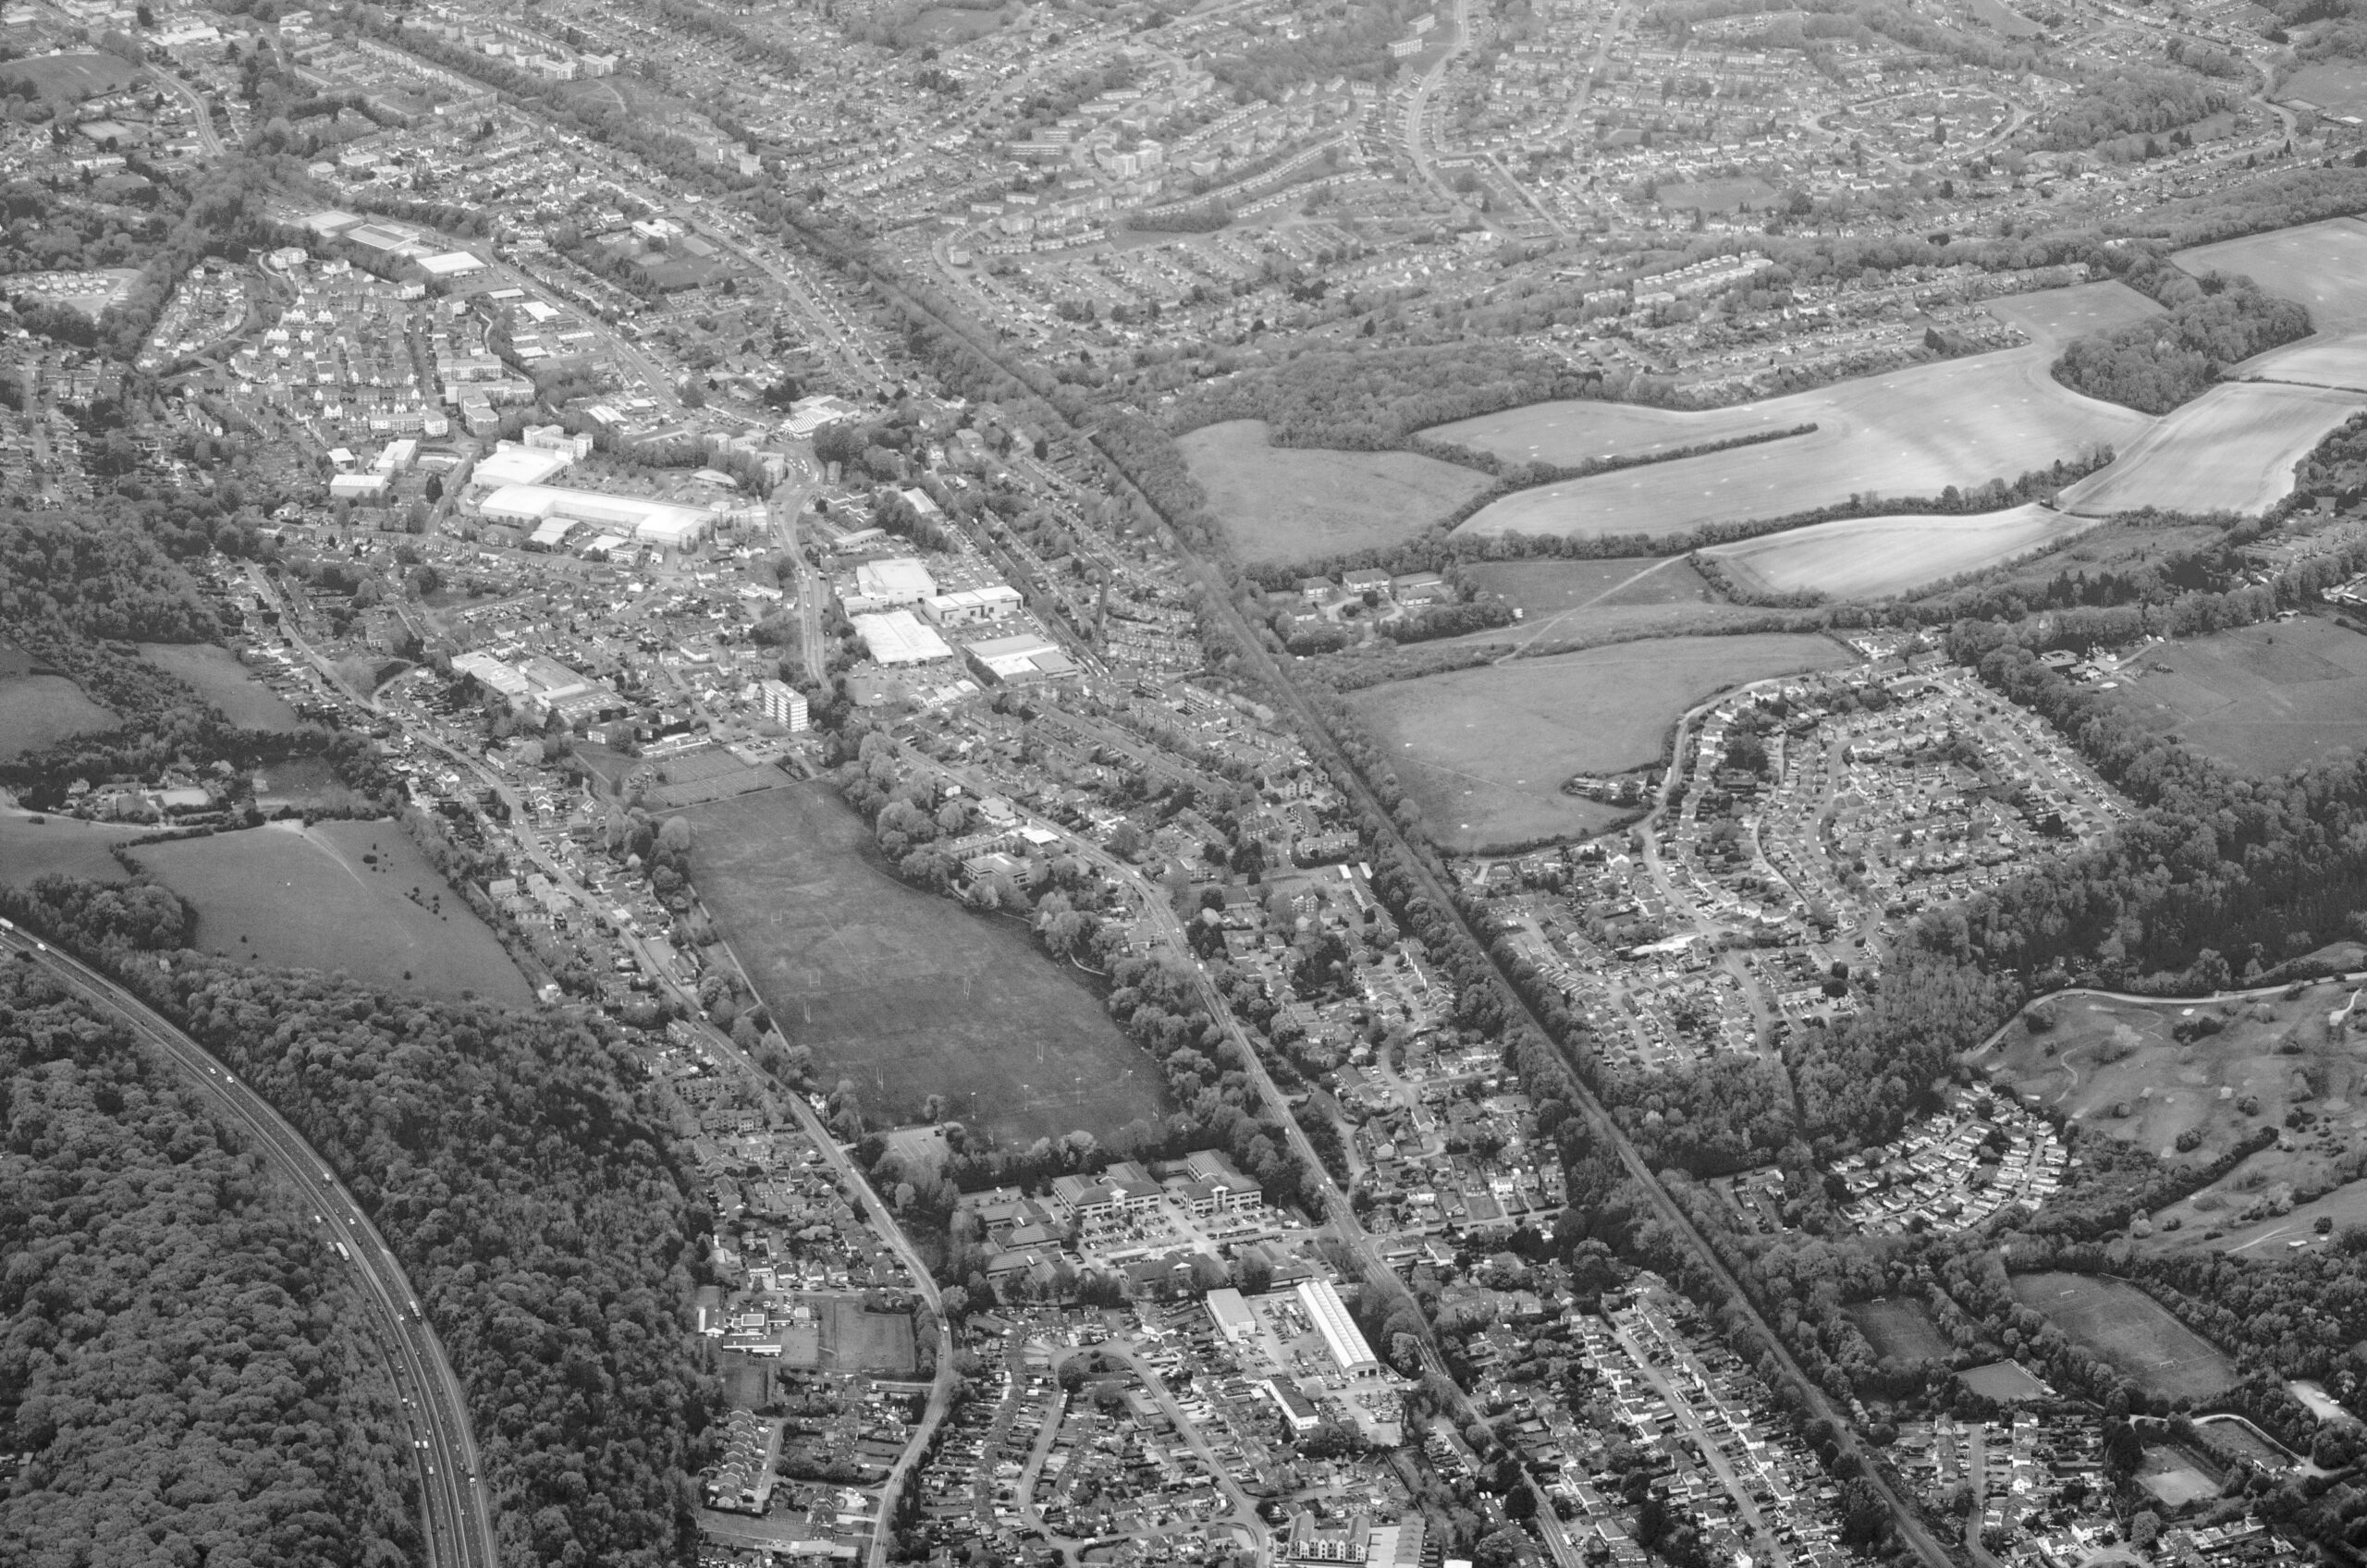 Aerial View of Loudwater and High Wycombe, Buckinghamshire